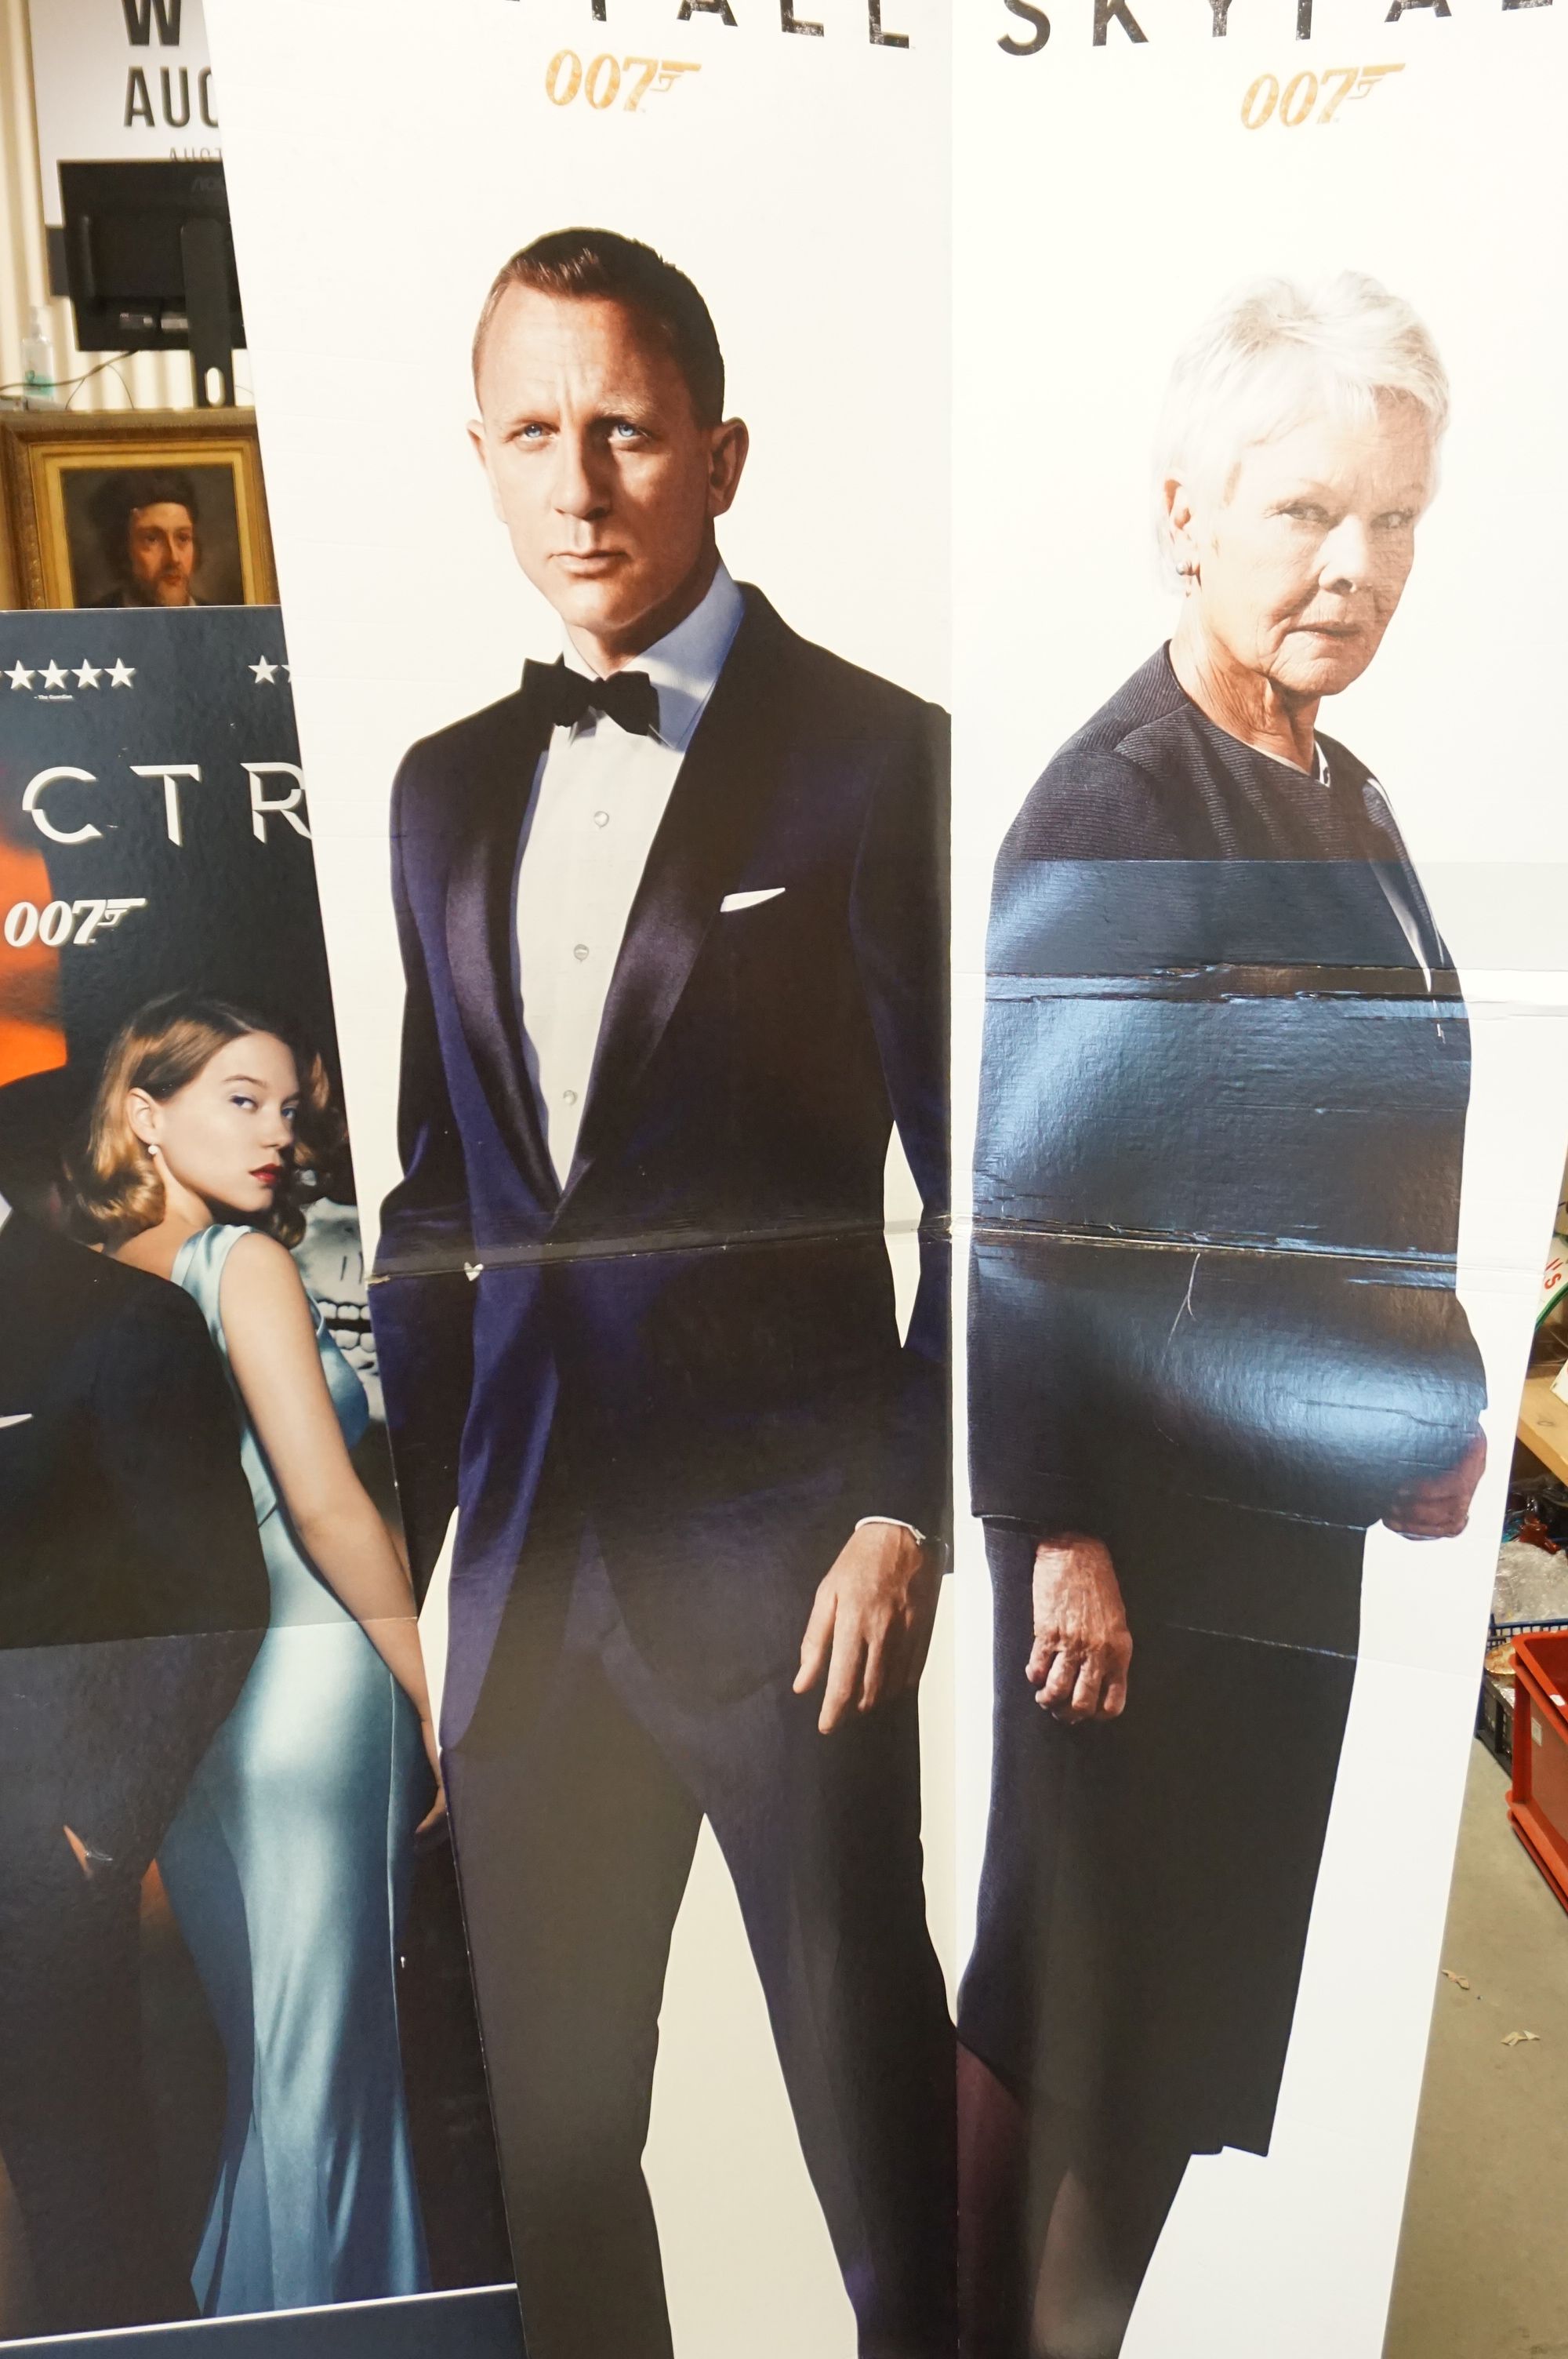 Three Cardboard Cinema Foyer Film Advertising Signs including Two Jams Bond Skyfall and the other - Image 4 of 8